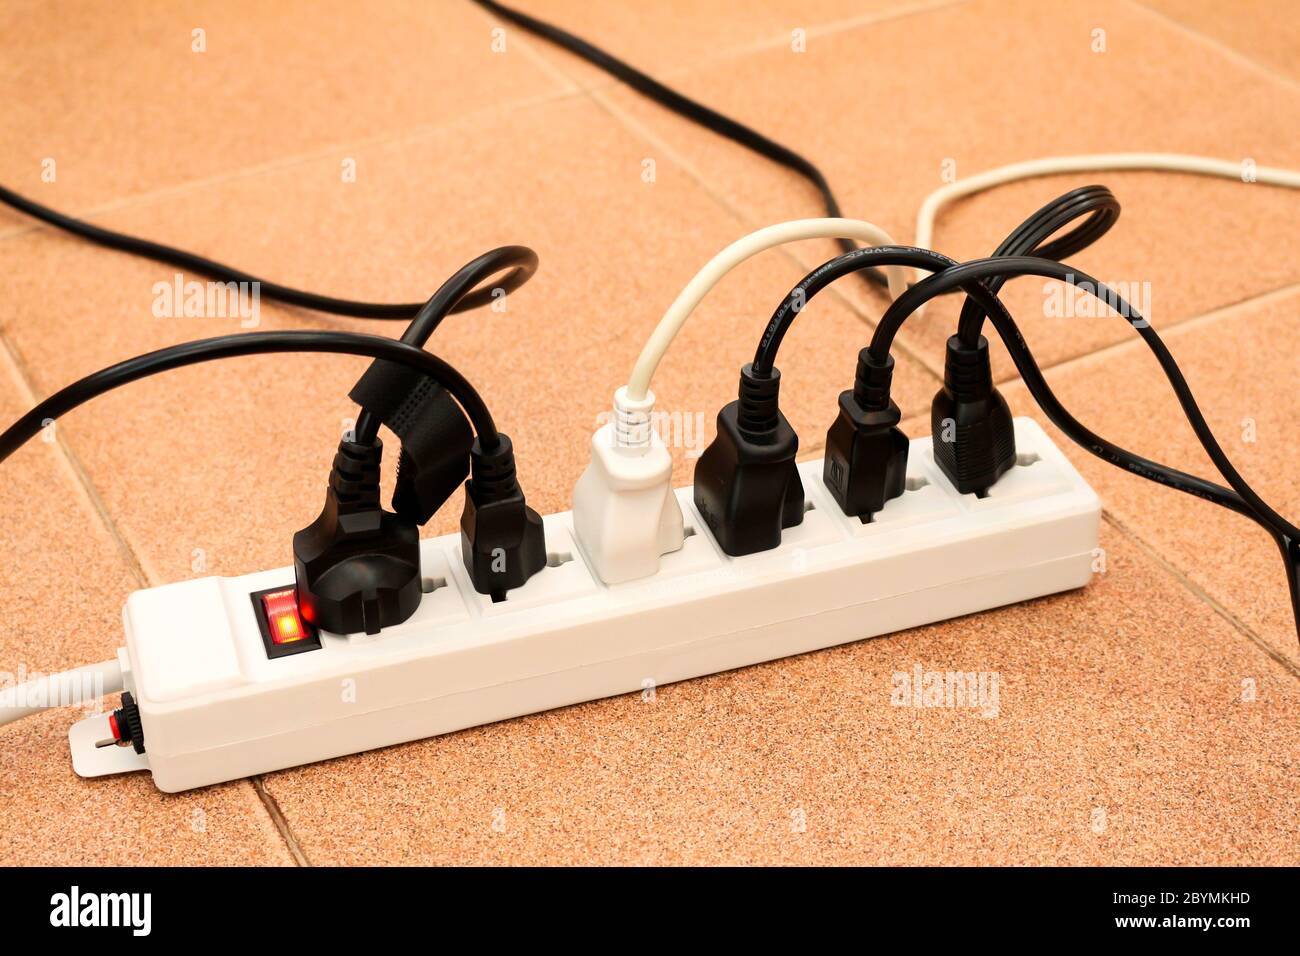 overloaded power boards outlet multiple socket electrical plug Stock Photo